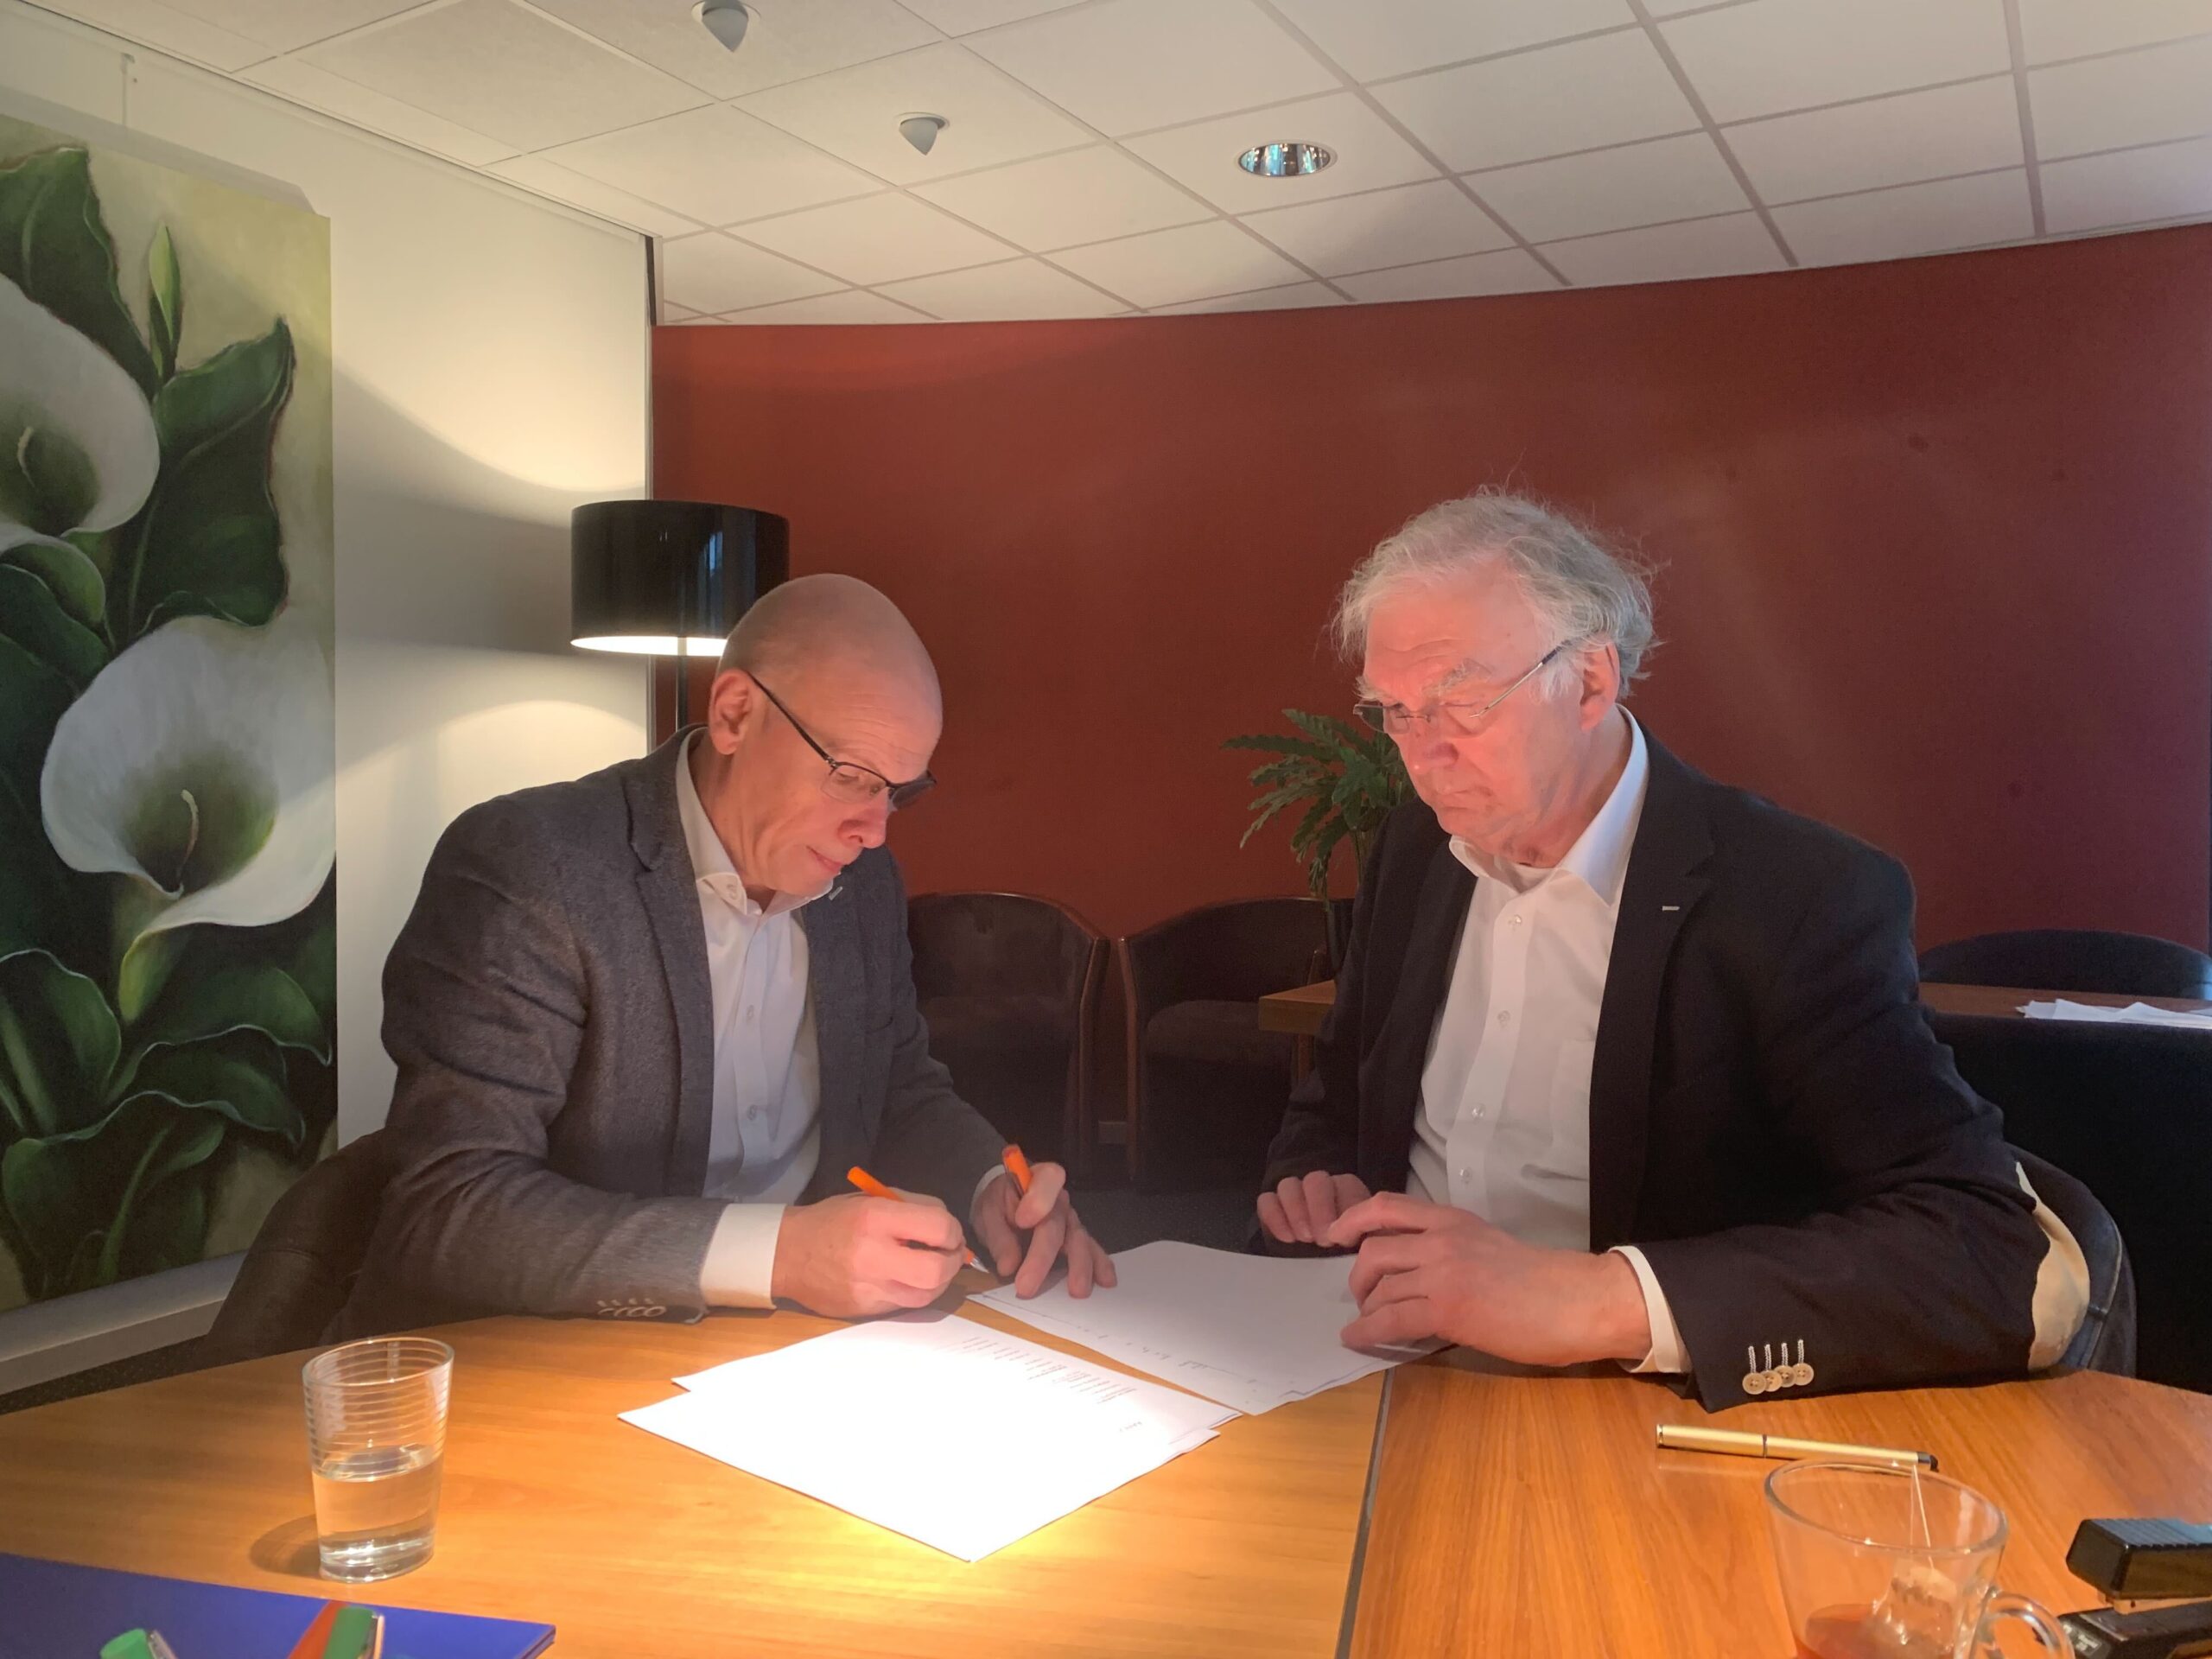 The establishment of TechSoft in the Netherlands